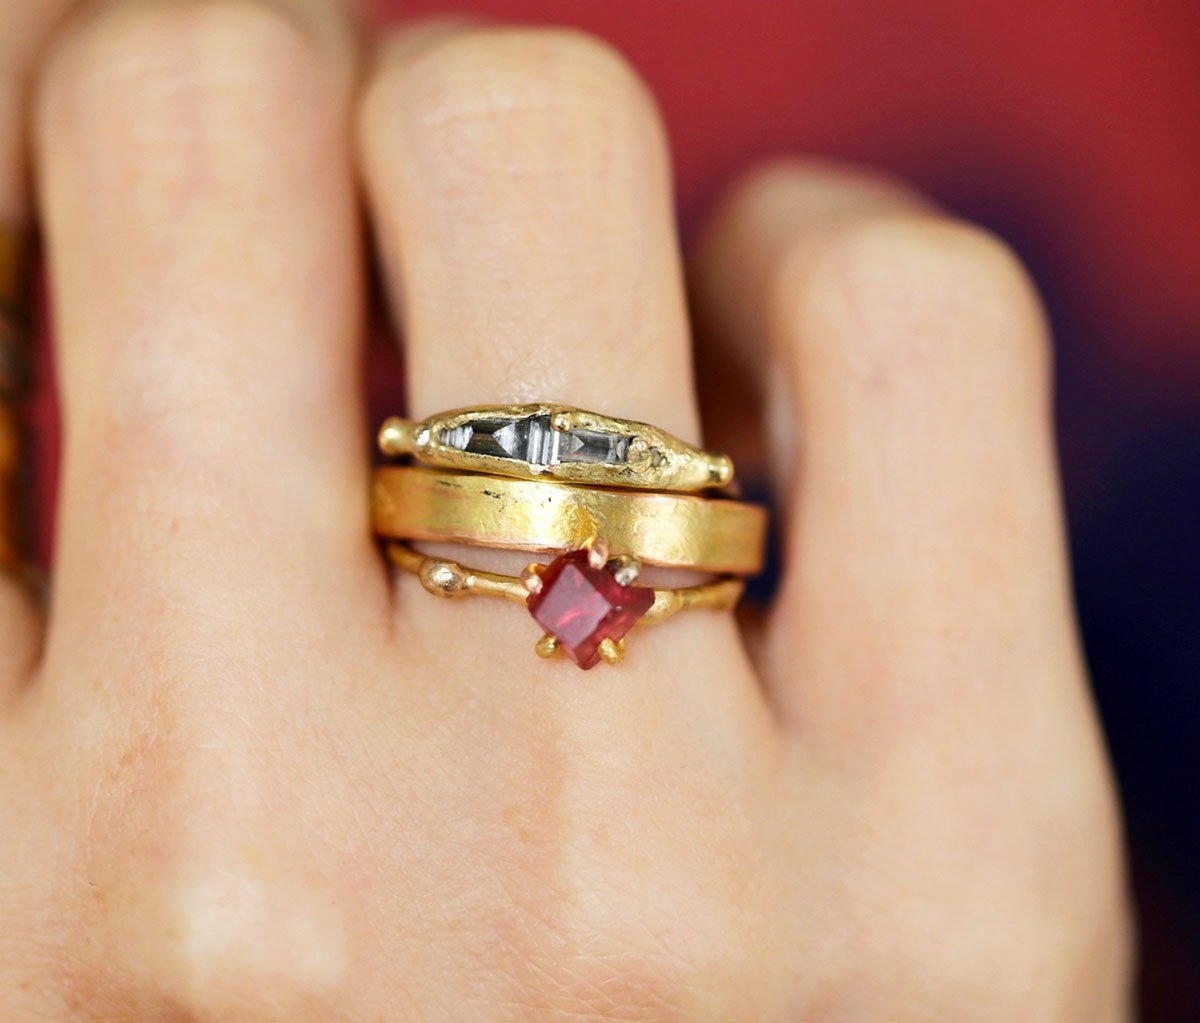 Ruby Ring And Diamond Baguette Ring On Hand